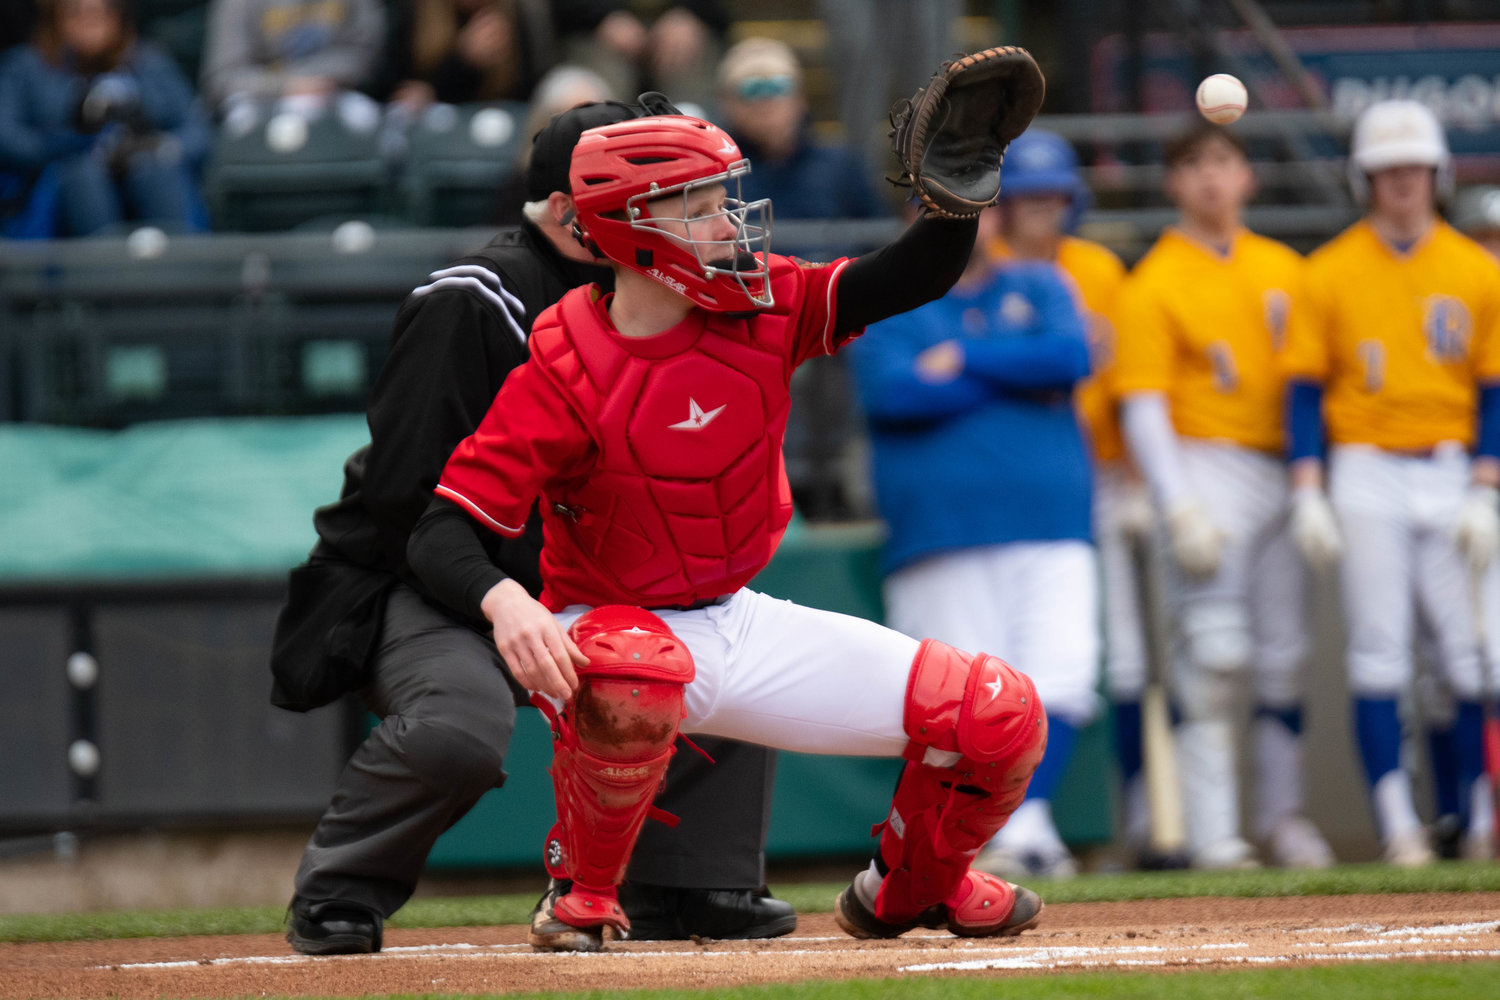 Austin Gonia catches the first pitch of the game in Tenino's 11-7 loss to Rochester, April 1 at Cheney Stadium.